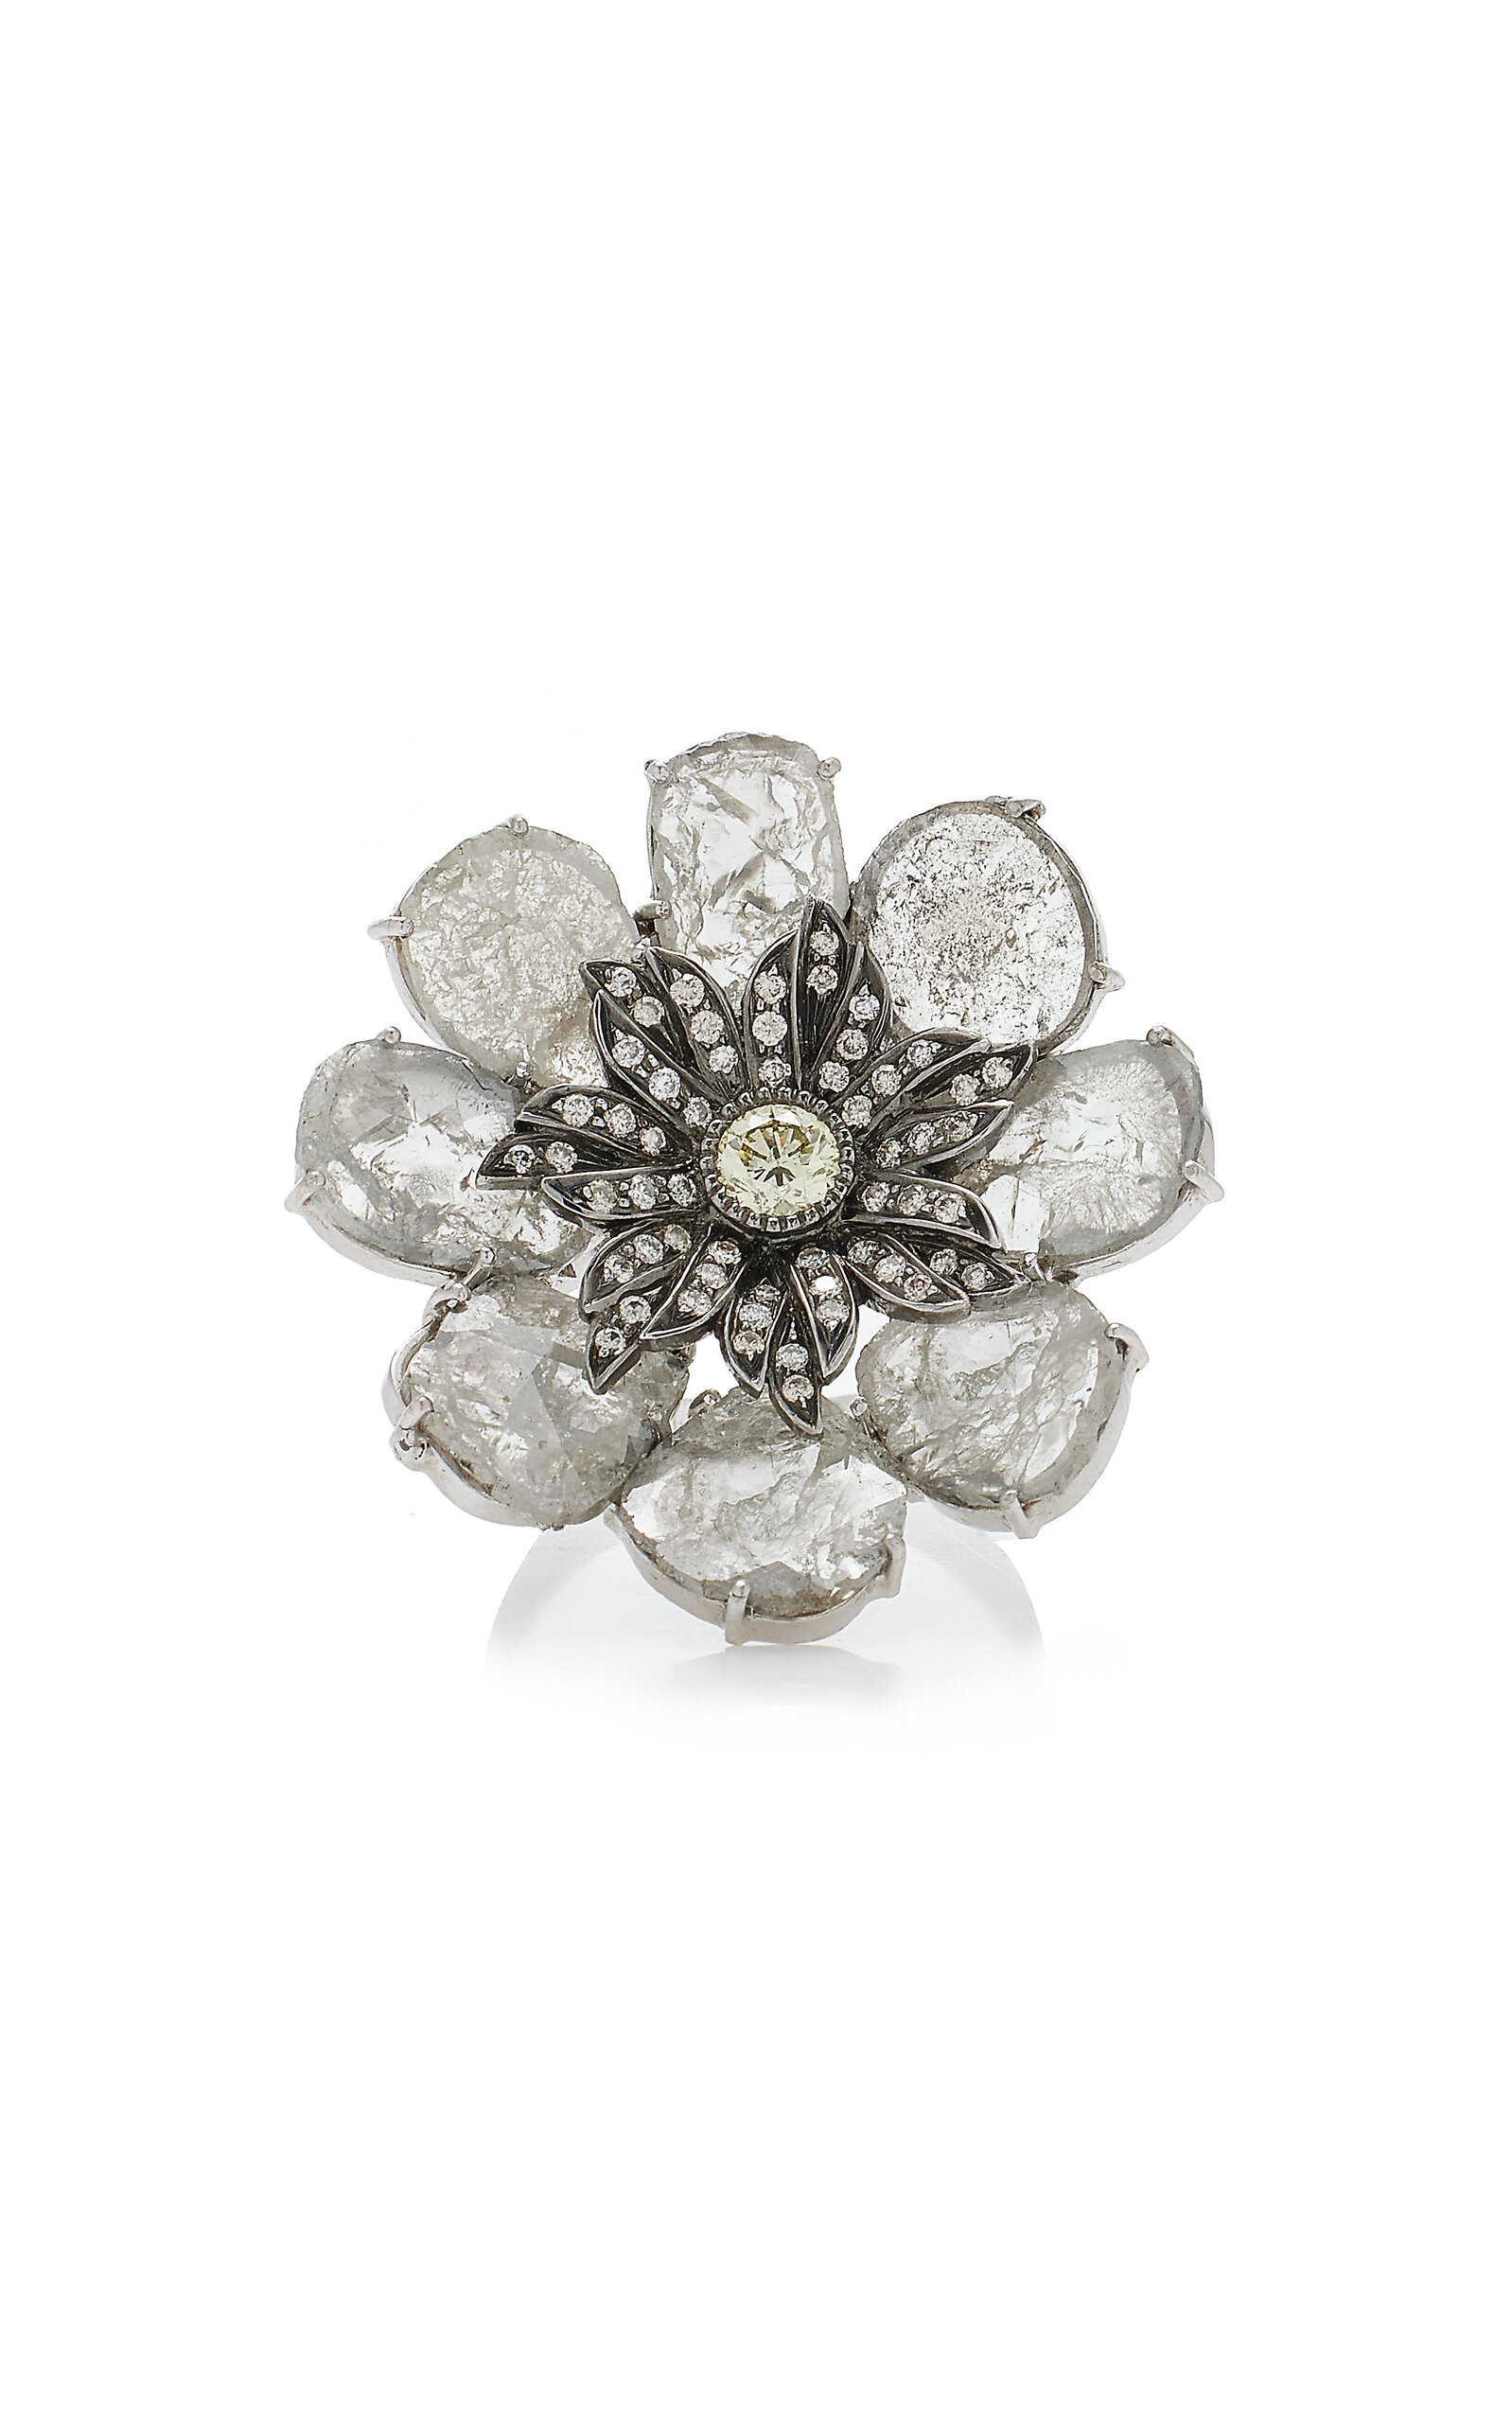 One of a Kind 18K White Gold Large Flower Diamond Ring